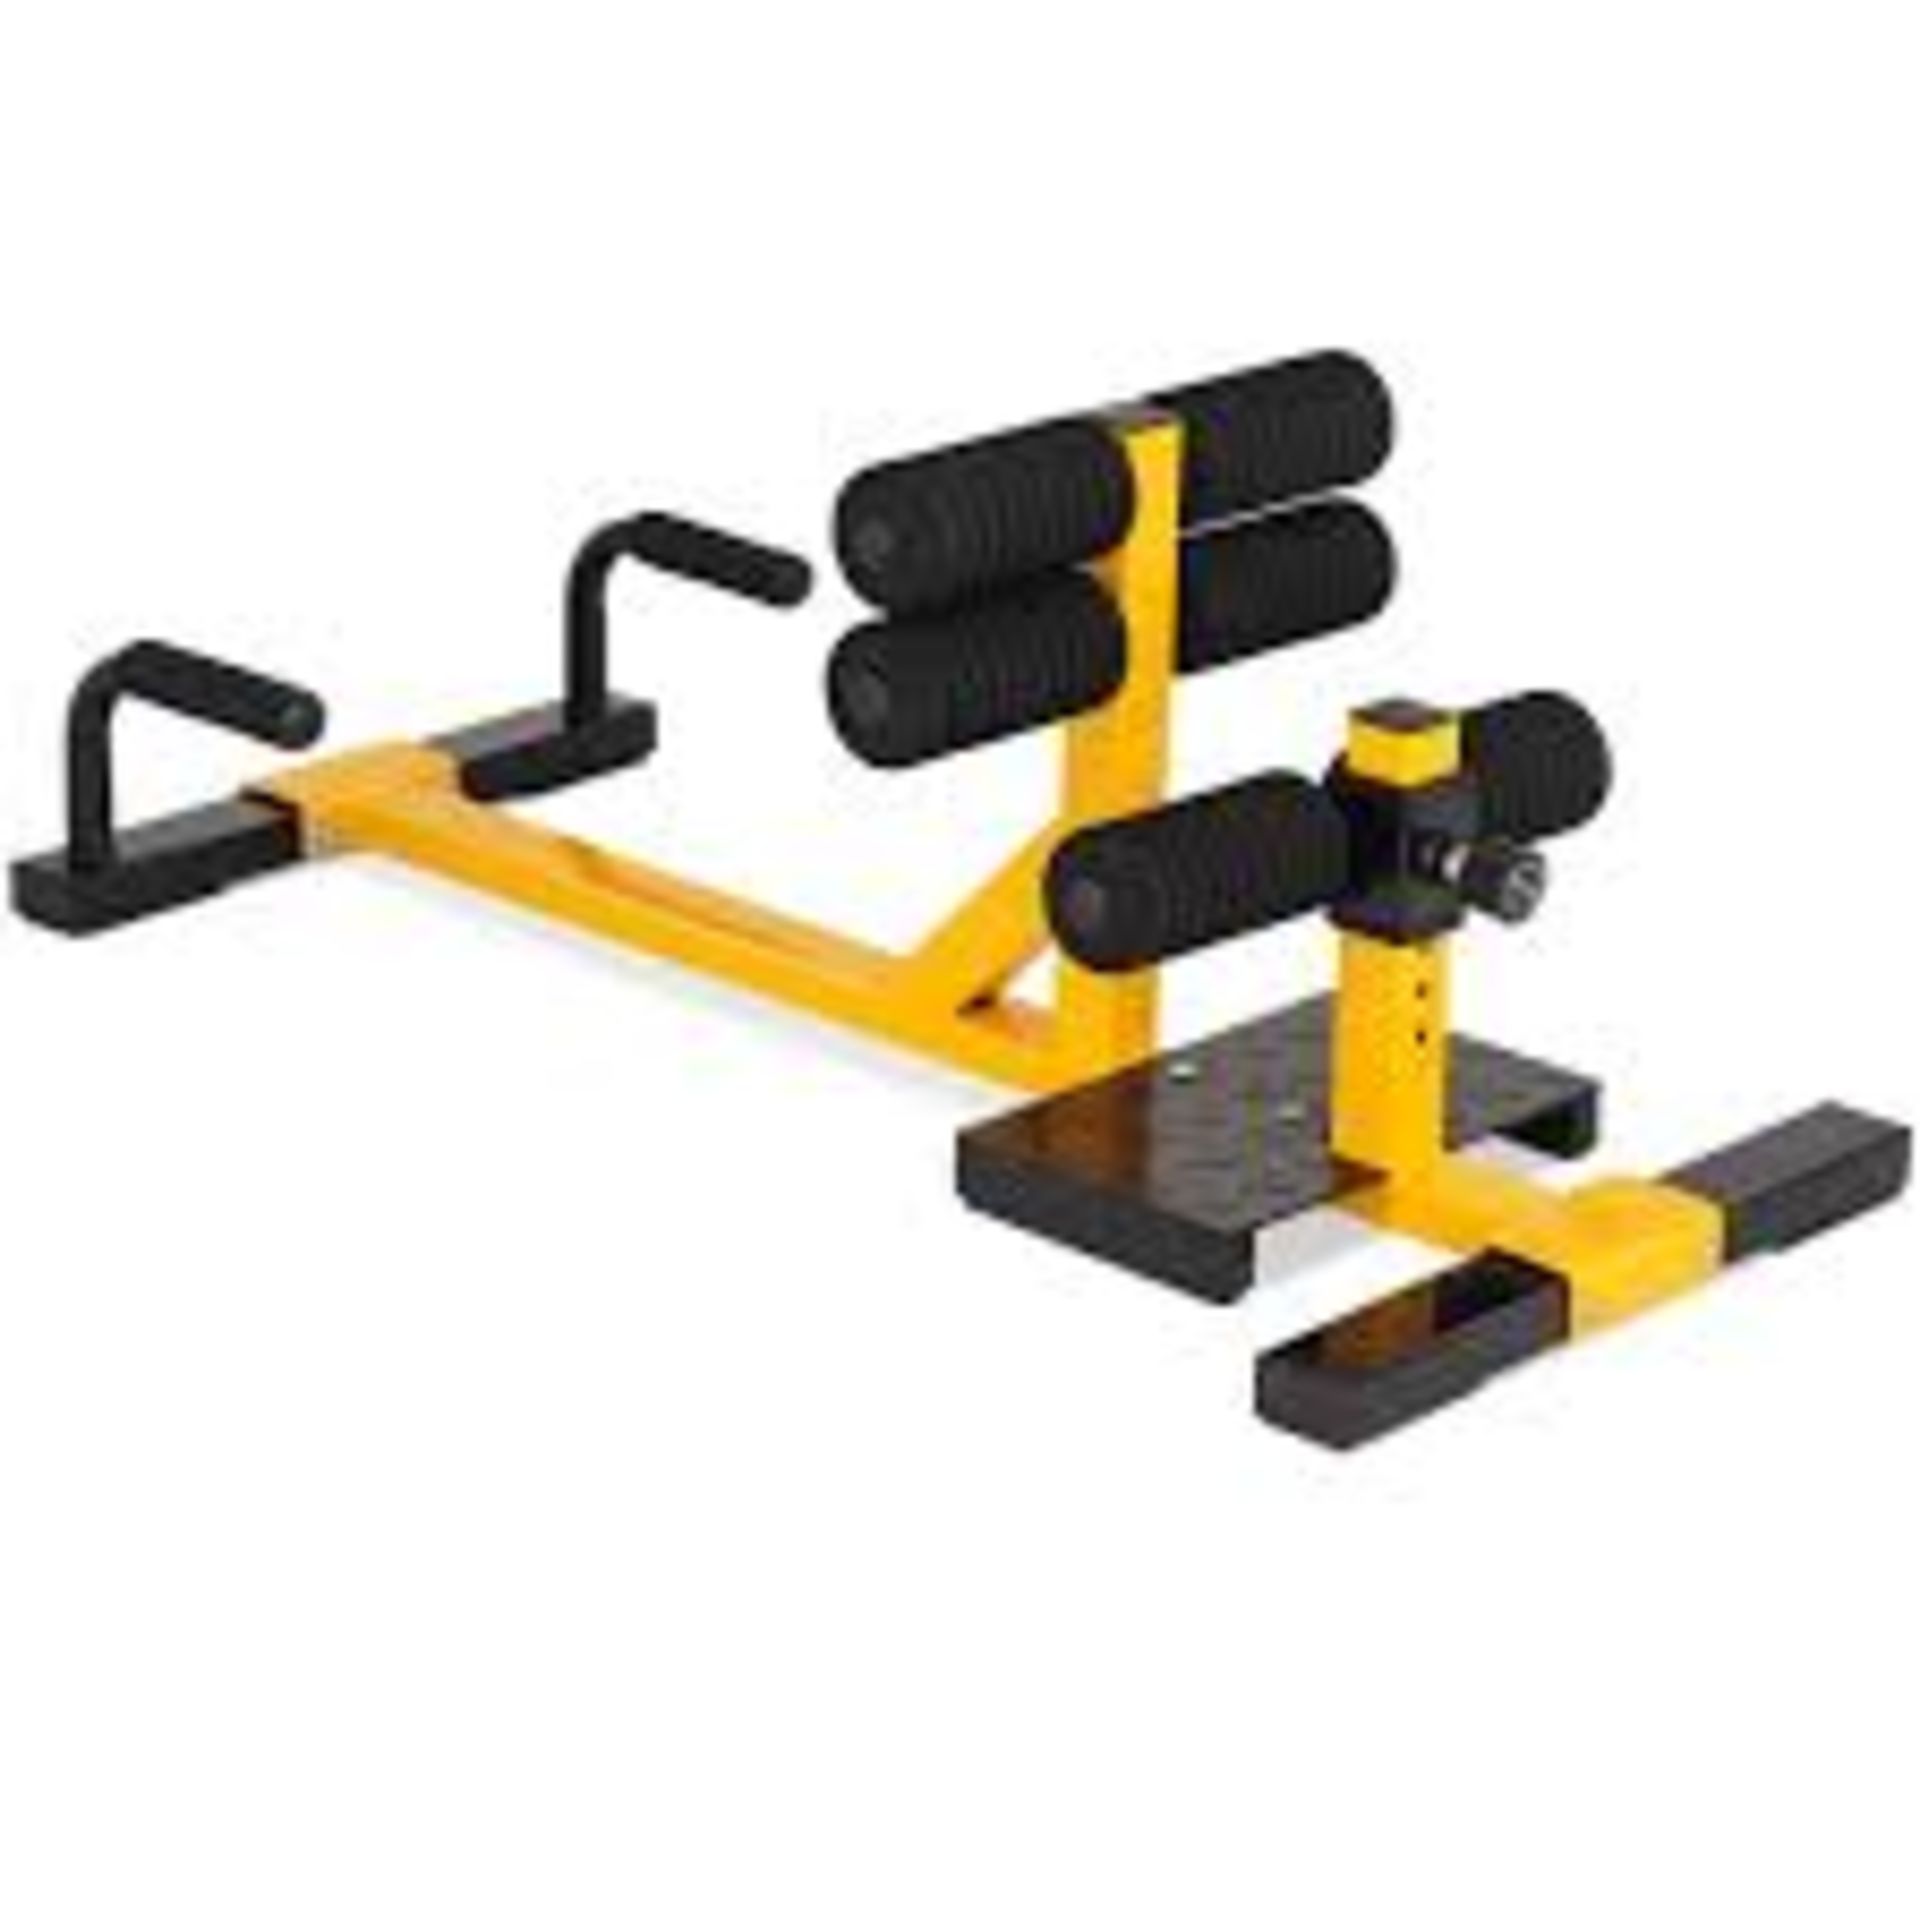 3-in-1 Sissy Squat Ab Workout Home Gym Sit-up Machine . -R14.6.